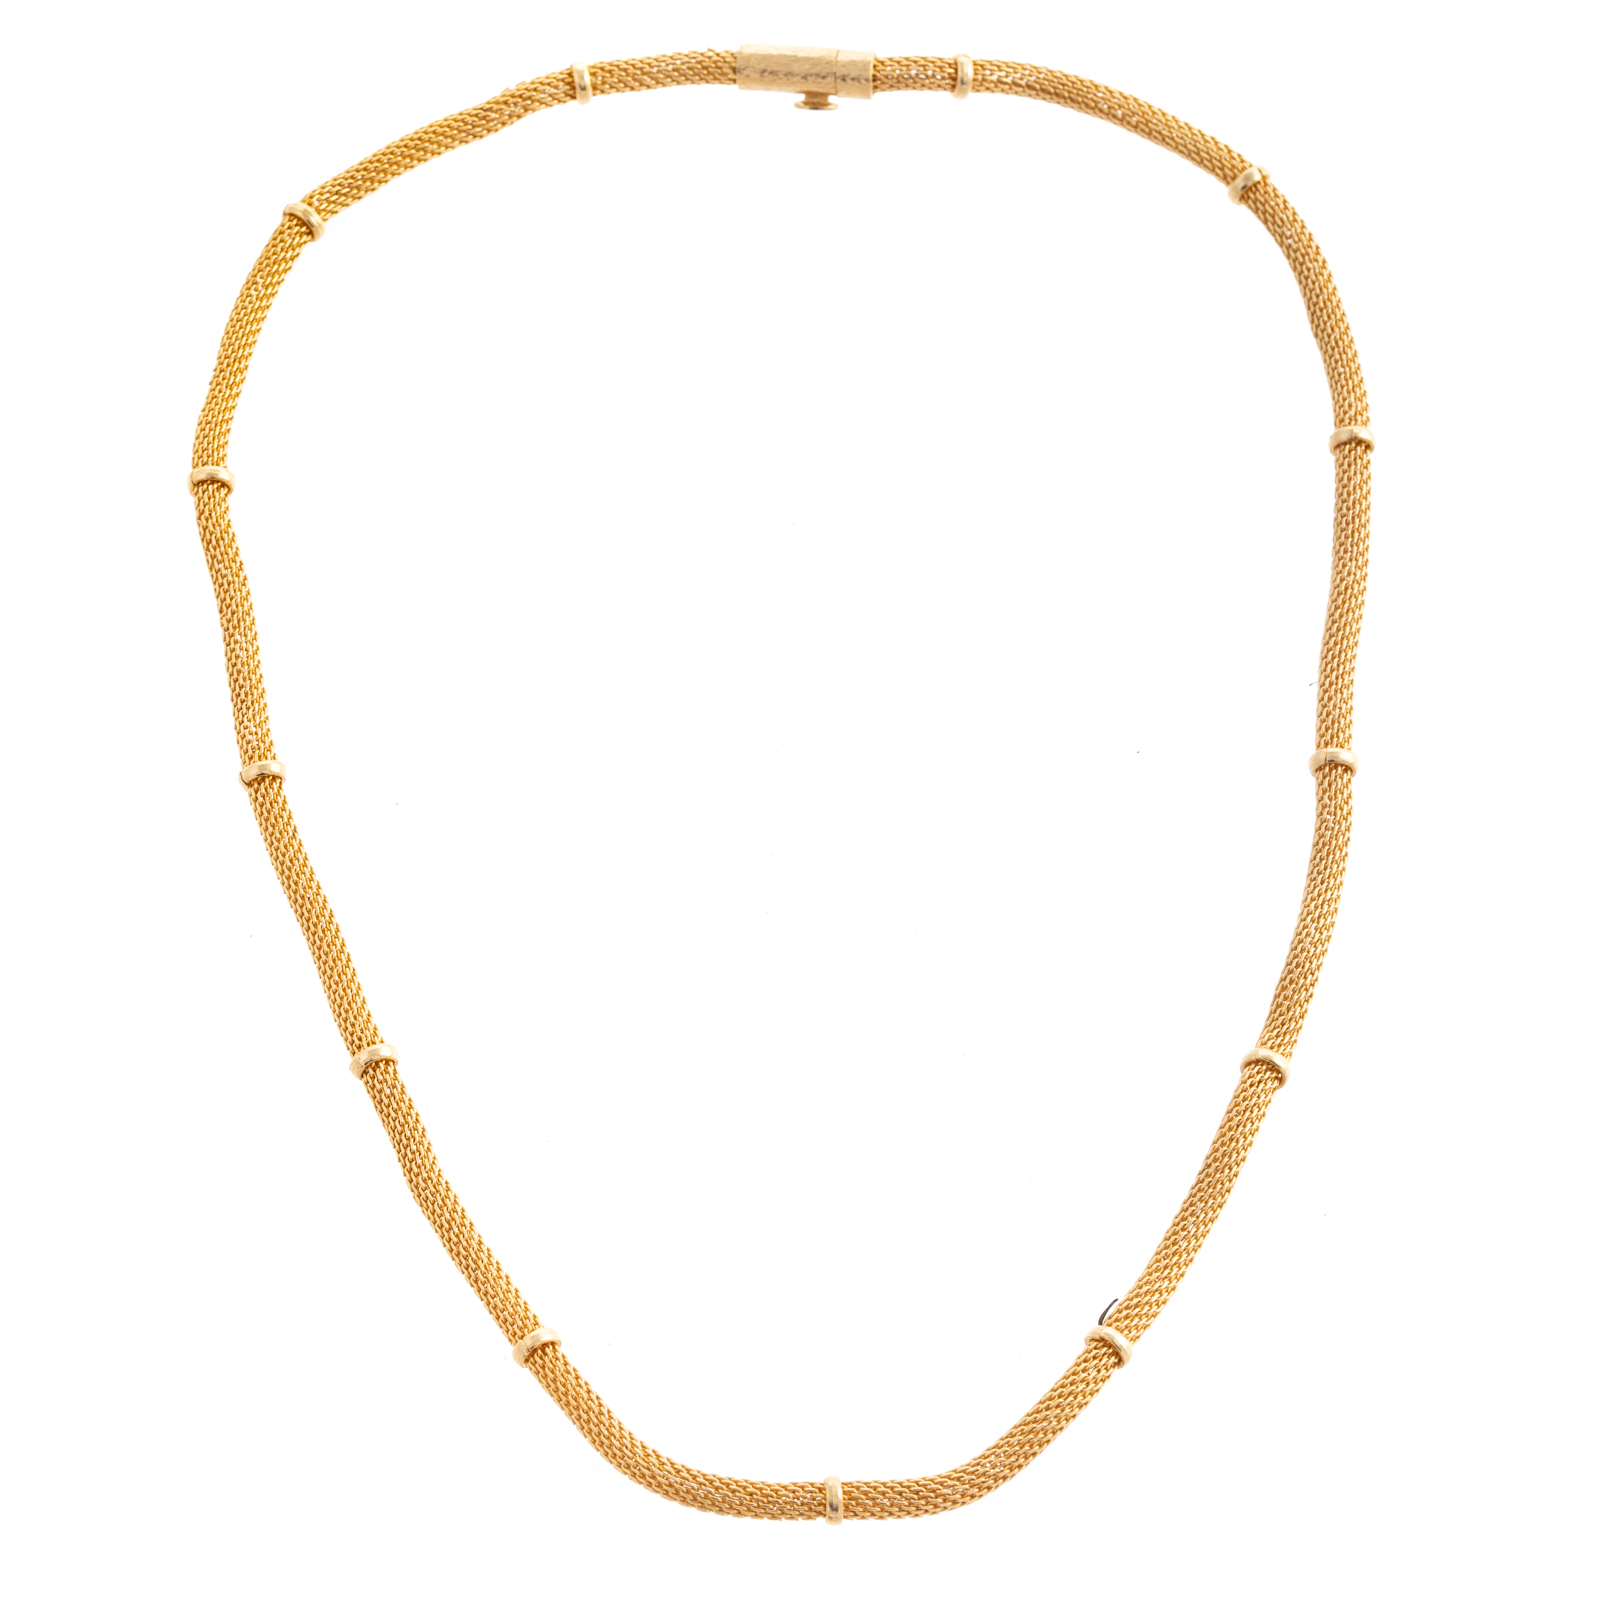 A FLEXIBLE MESH LINK NECKLACE IN 29df31